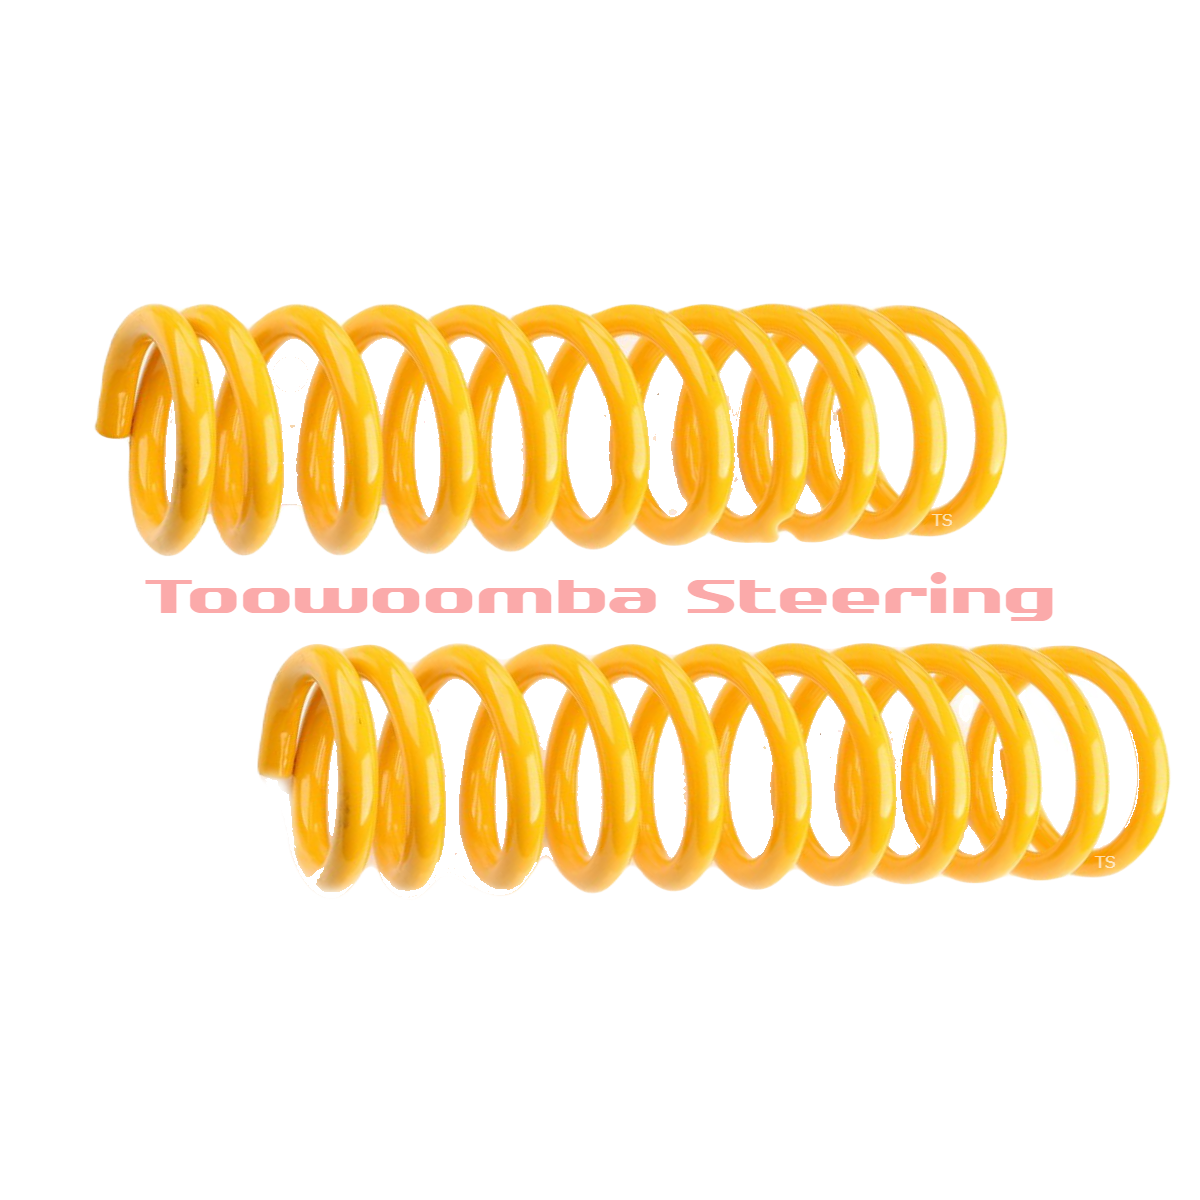 Ford Falcon XA, XB, XC 6CYL Steel head King Springs Front Coils